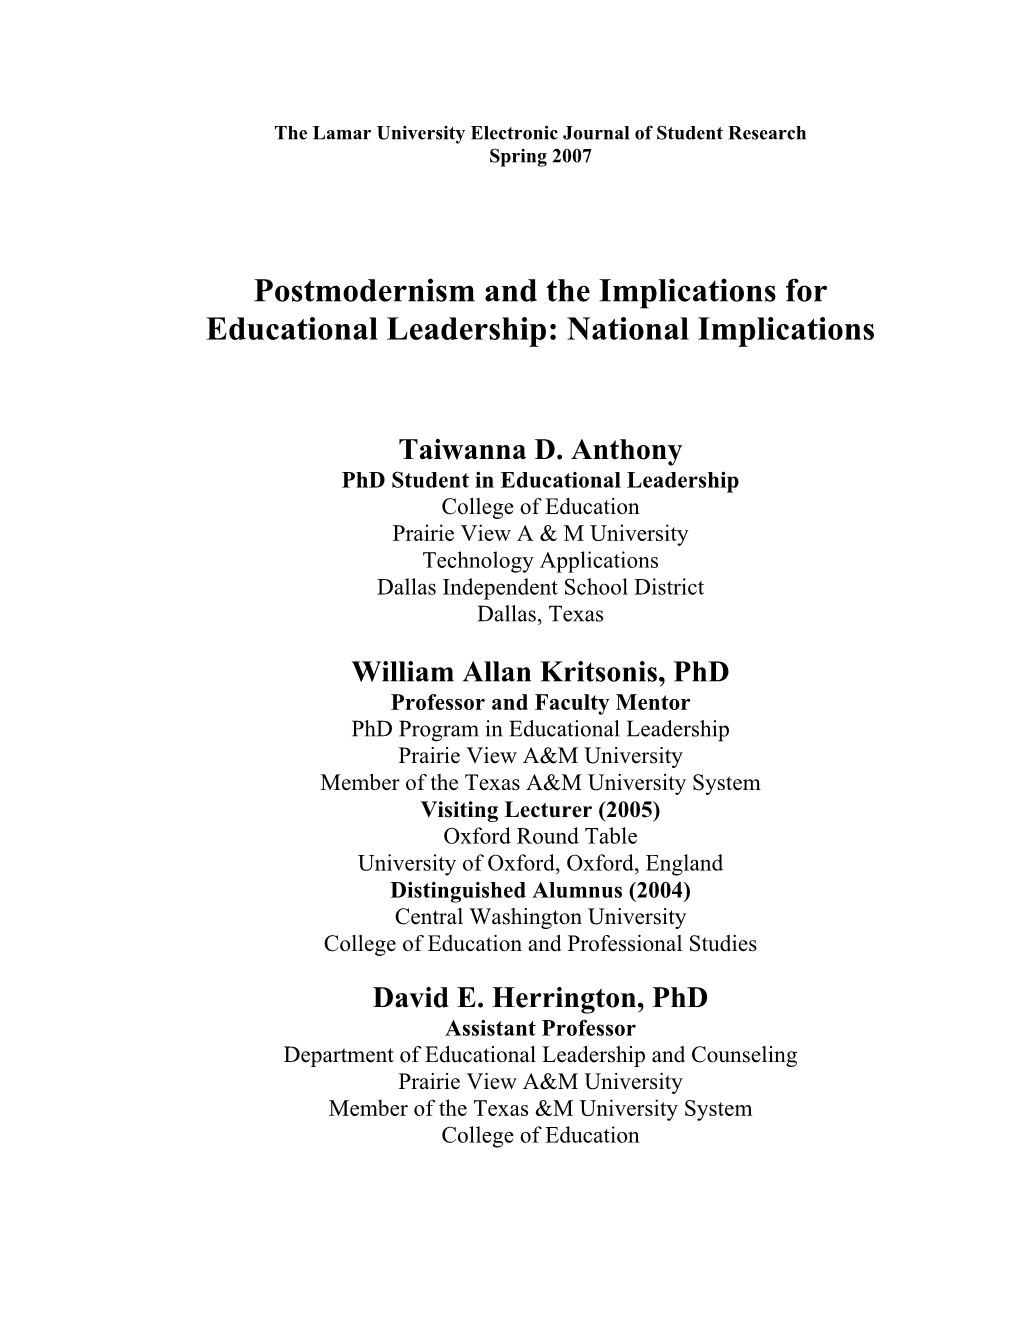 Postmodernism and the Implications for Educational Leadership: National Implications